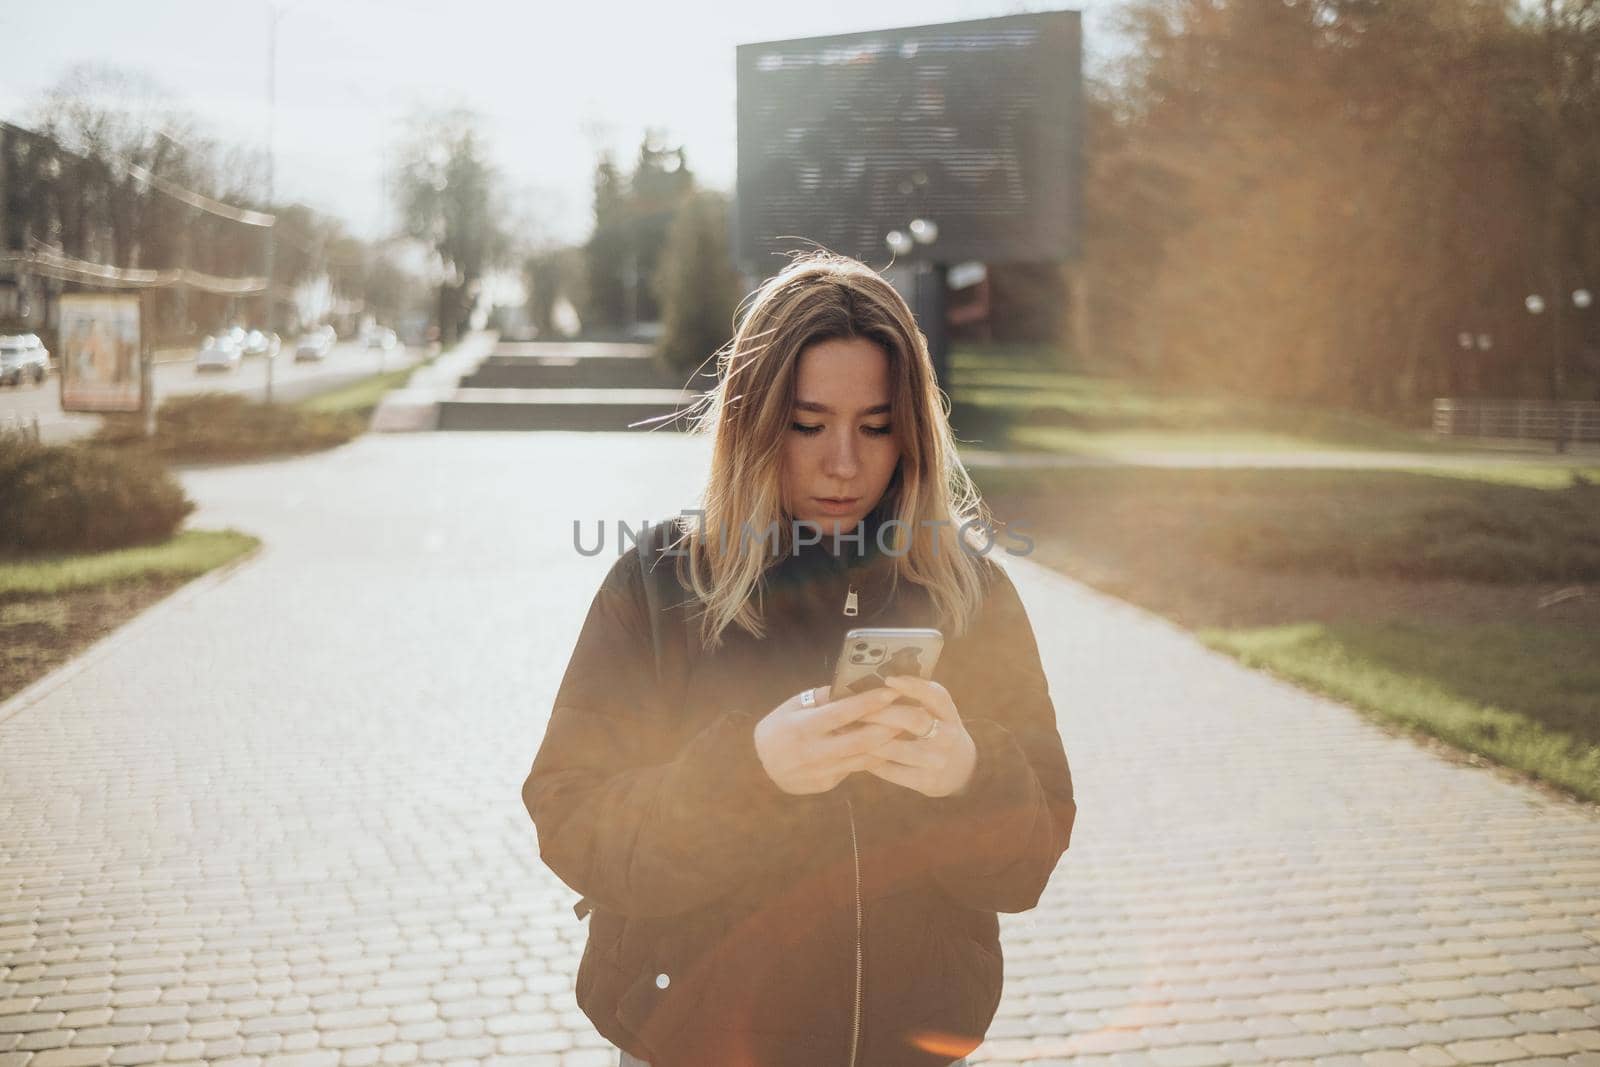 gorgeous beautiful young woman with blonde hair messaging on the smart-phone at the city street background. pretty girl having smart phone conversation in sun flare.